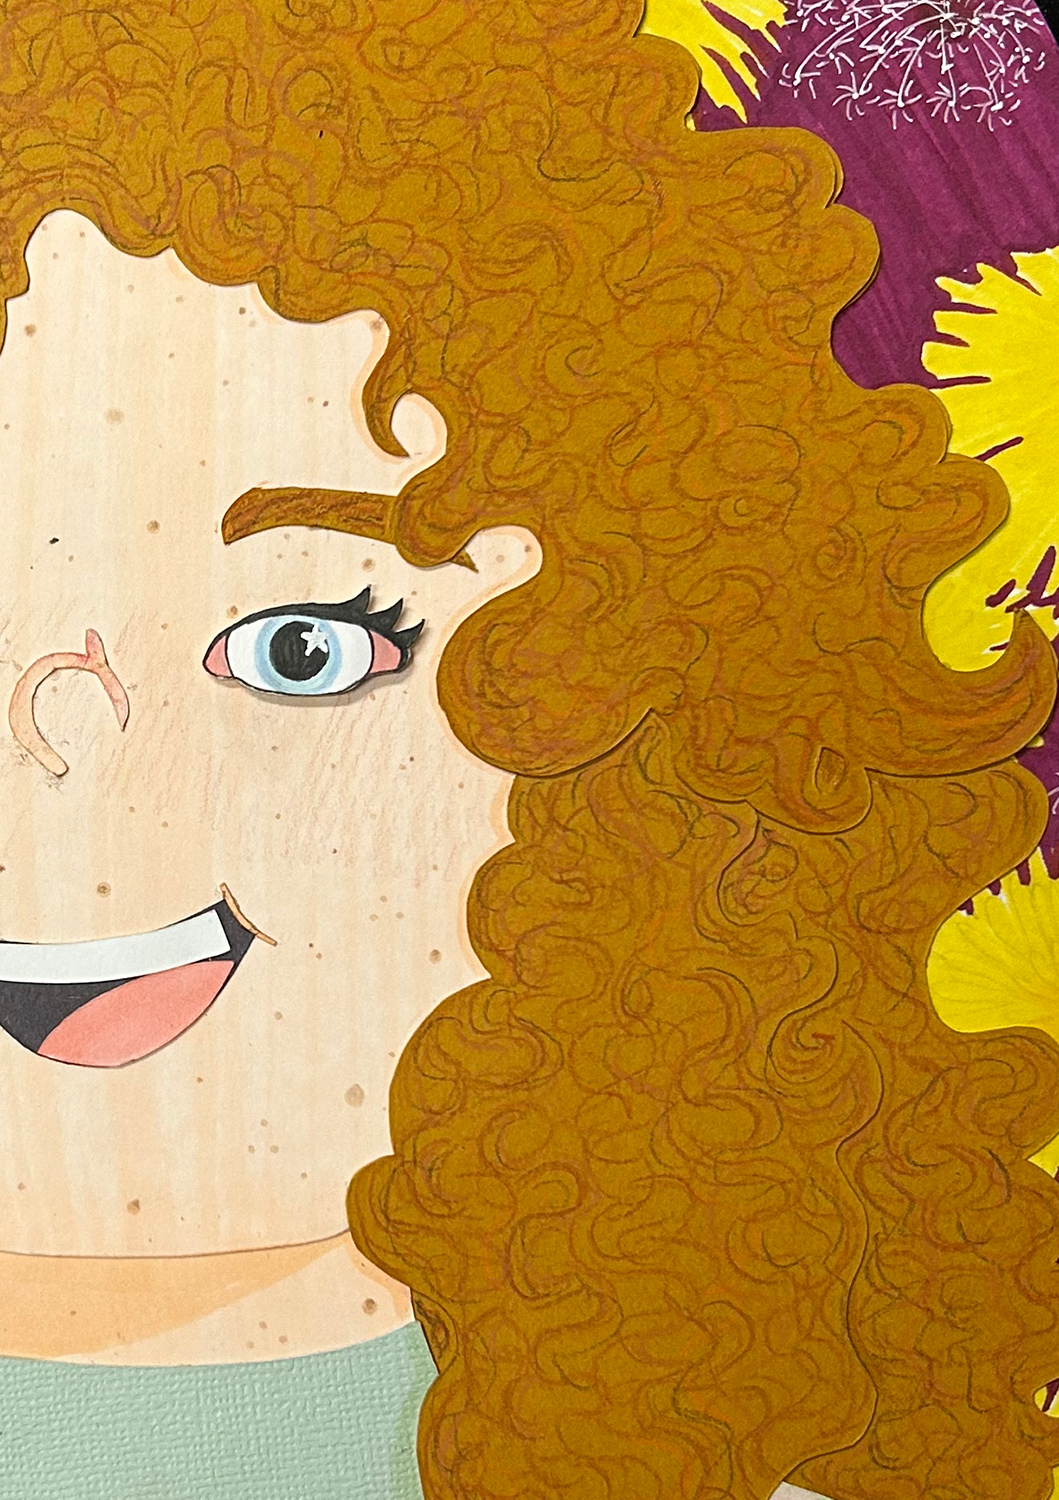 Close-up image of cut-paper portrait of a girl with curly red hair, big blue eyes, and freckles. The image crops to only half of her face. The background is a deep magenta/plum filled with dandelions in different stages of development.